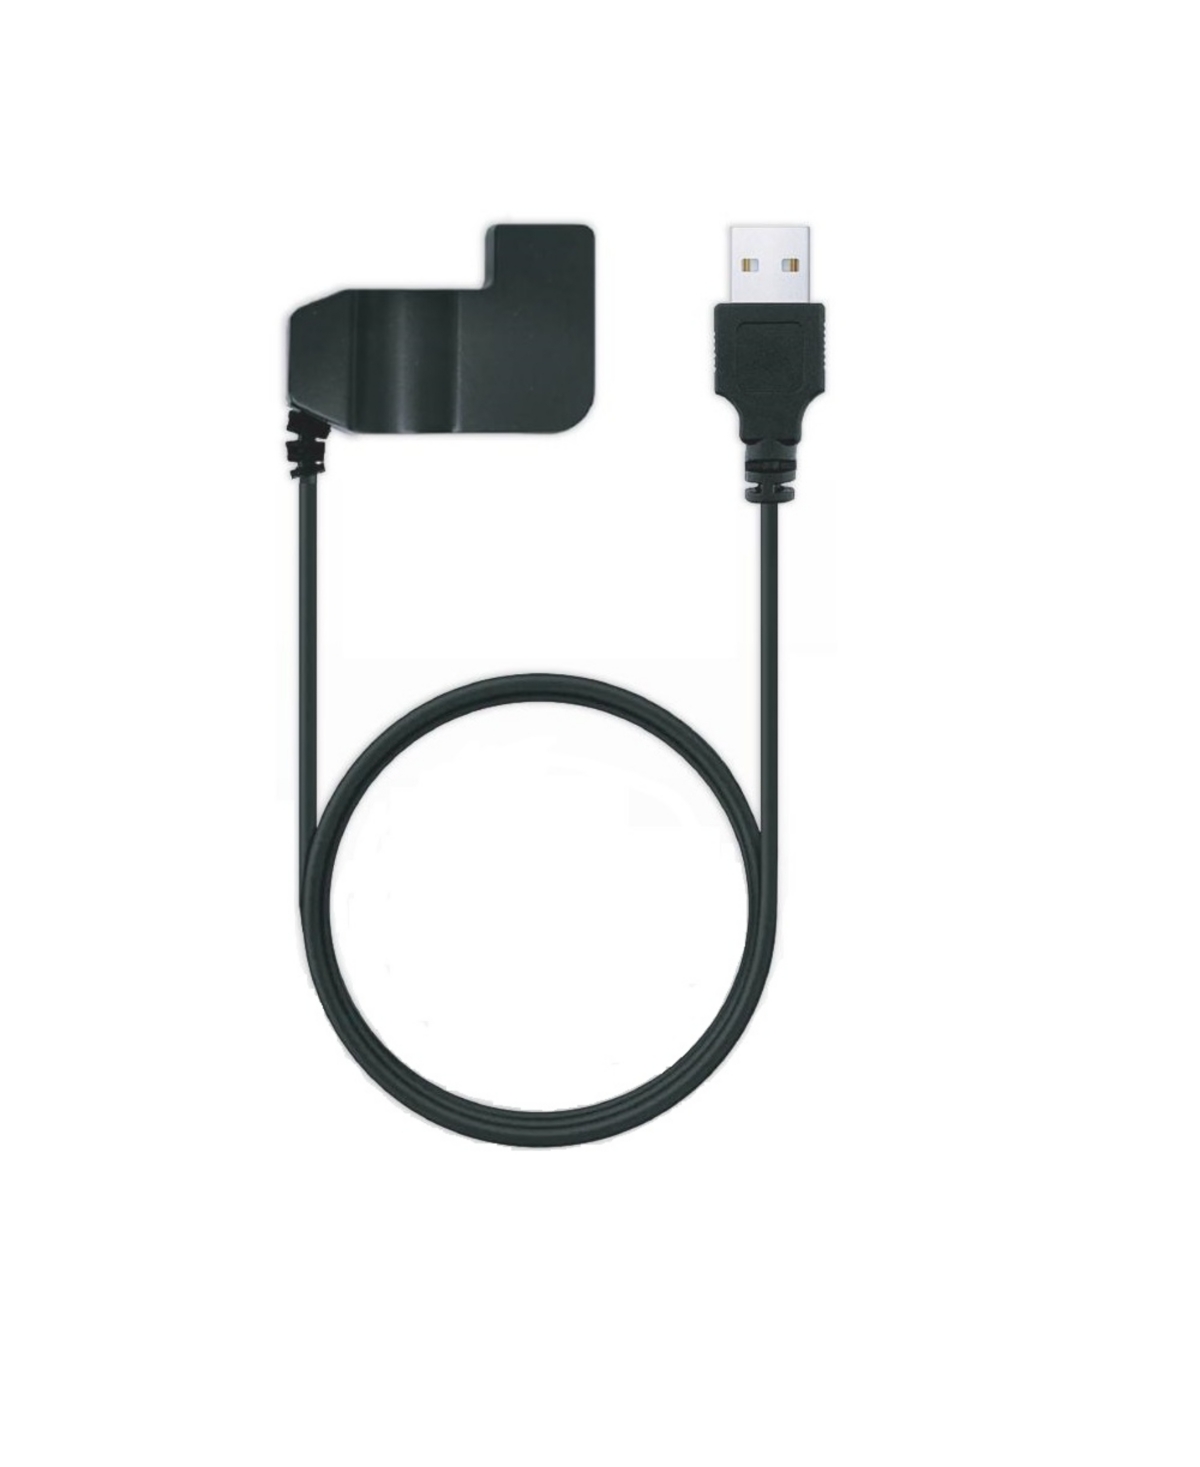 Itouch Active Fitness Tracker Replacement Usb Charger Cable In Black